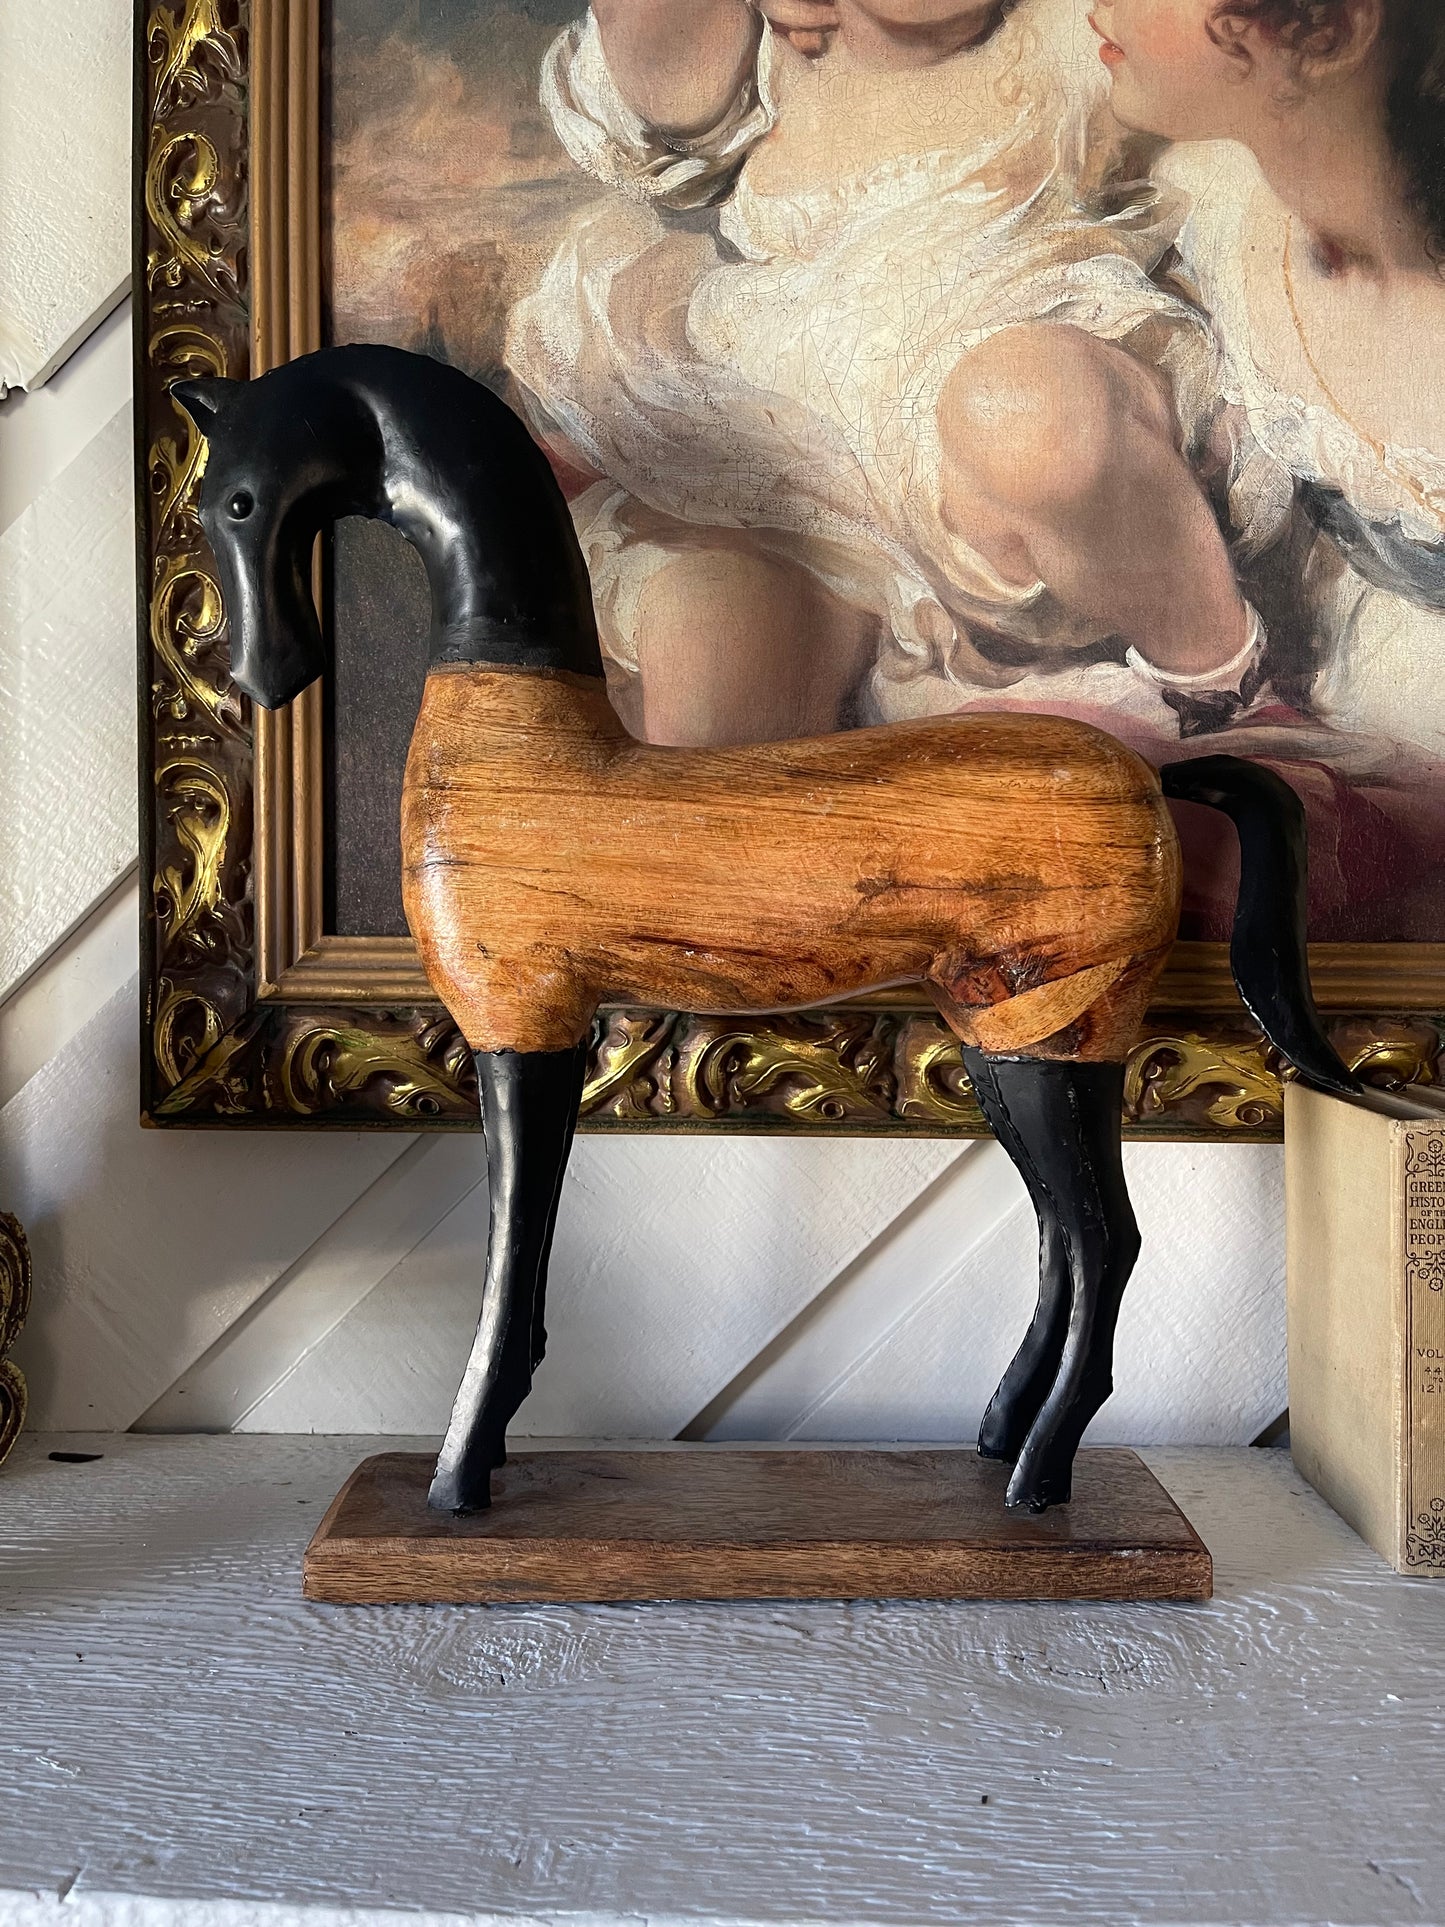 Pair of Vintage Hand-Carved Wooden and Metal Horse Sculptures